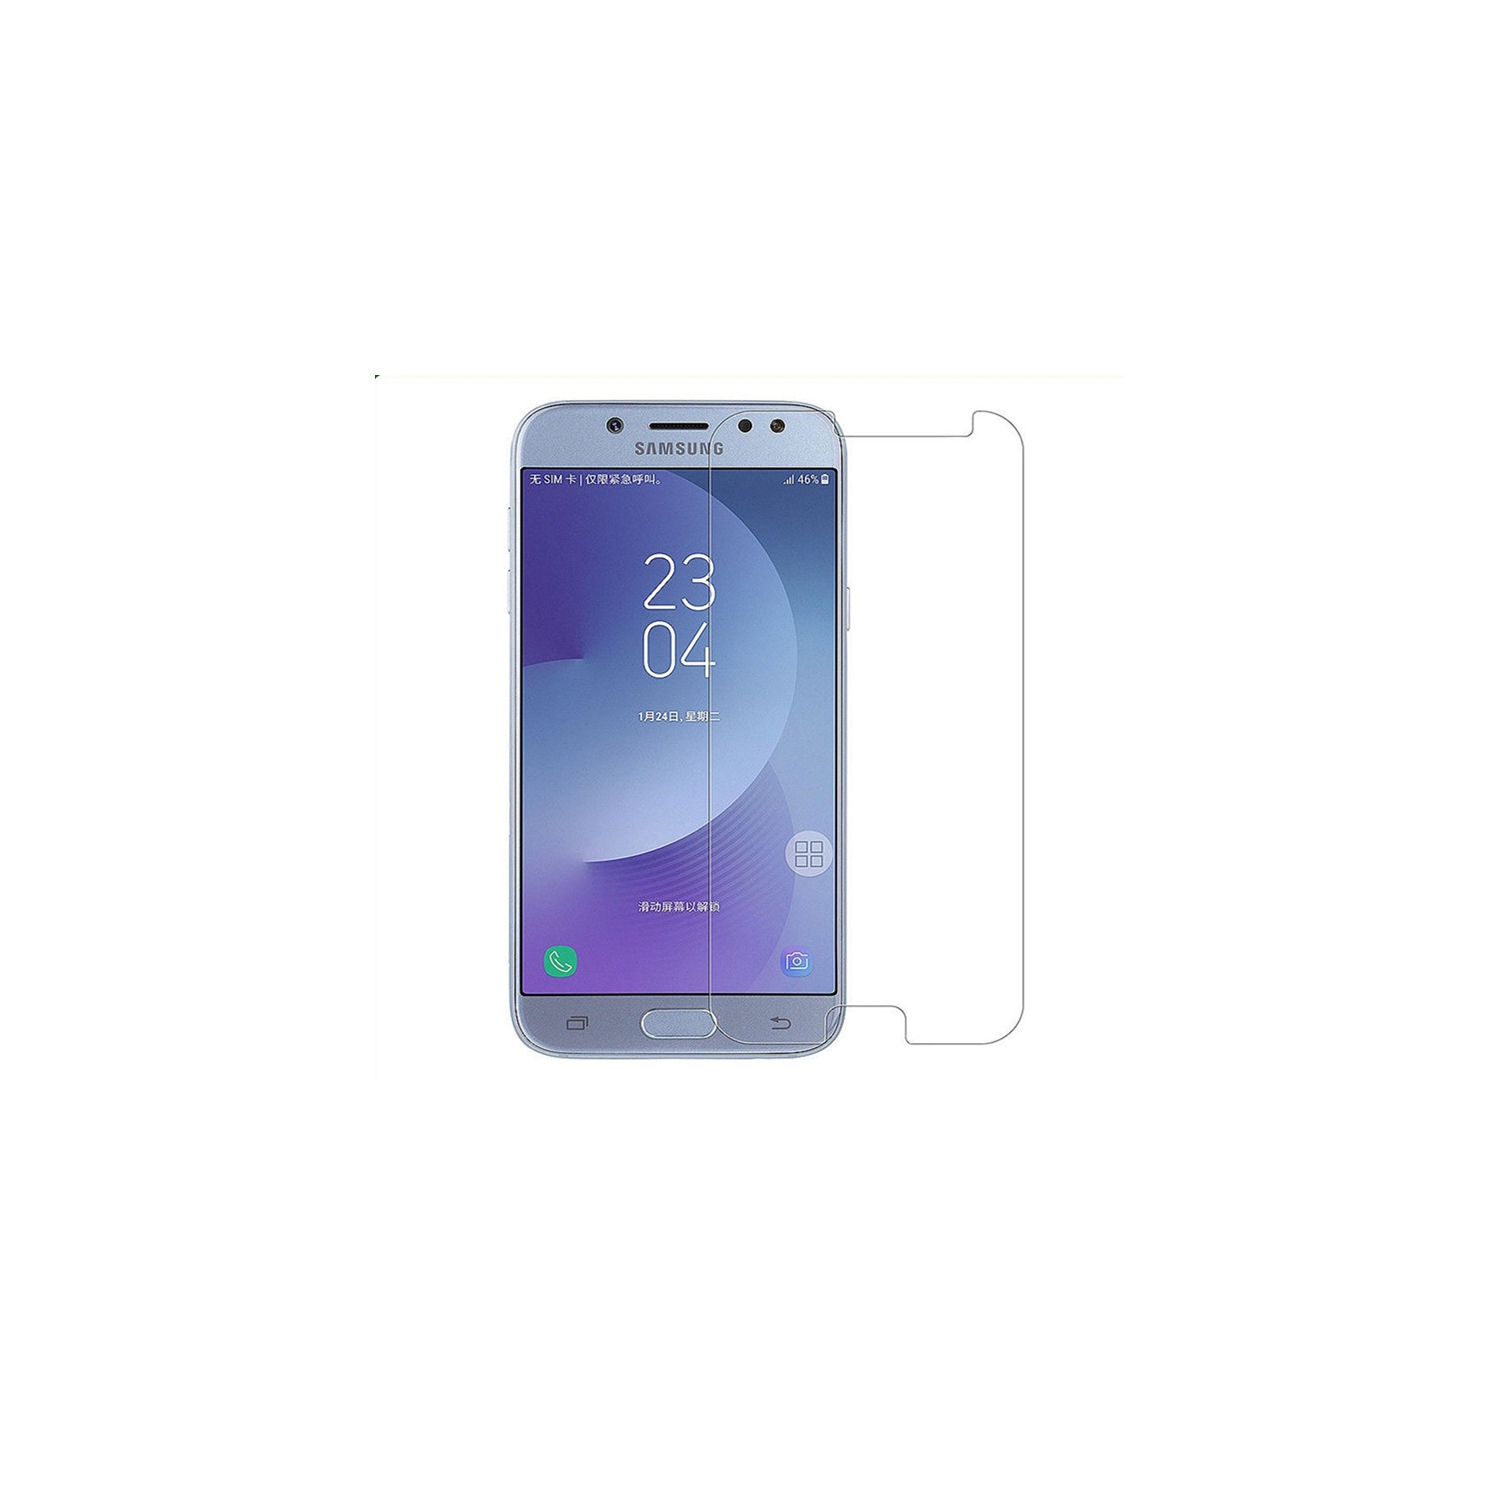 【2 Packs】 CSmart Premium Tempered Glass Screen Protector for Samsung Galaxy J3 Prime 2017 2018, Case Friendly & Bubble Free